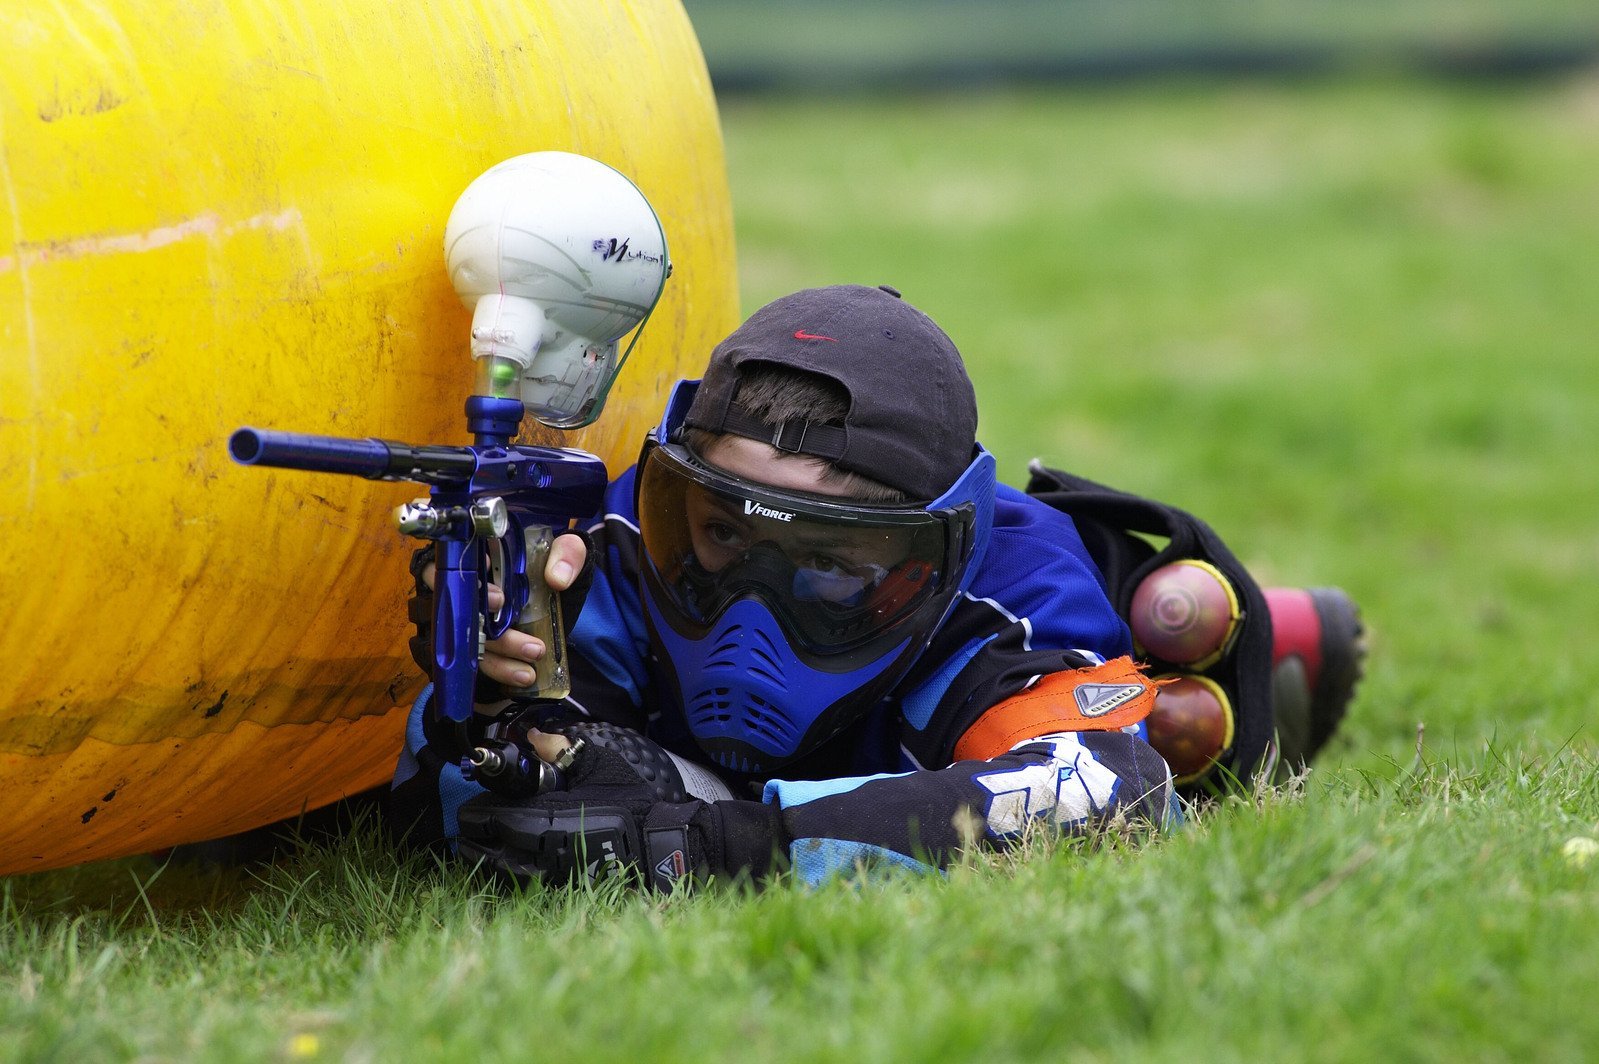 thepaintballzone-co-uk-paintball-history-and-why-the-sport-is-popular